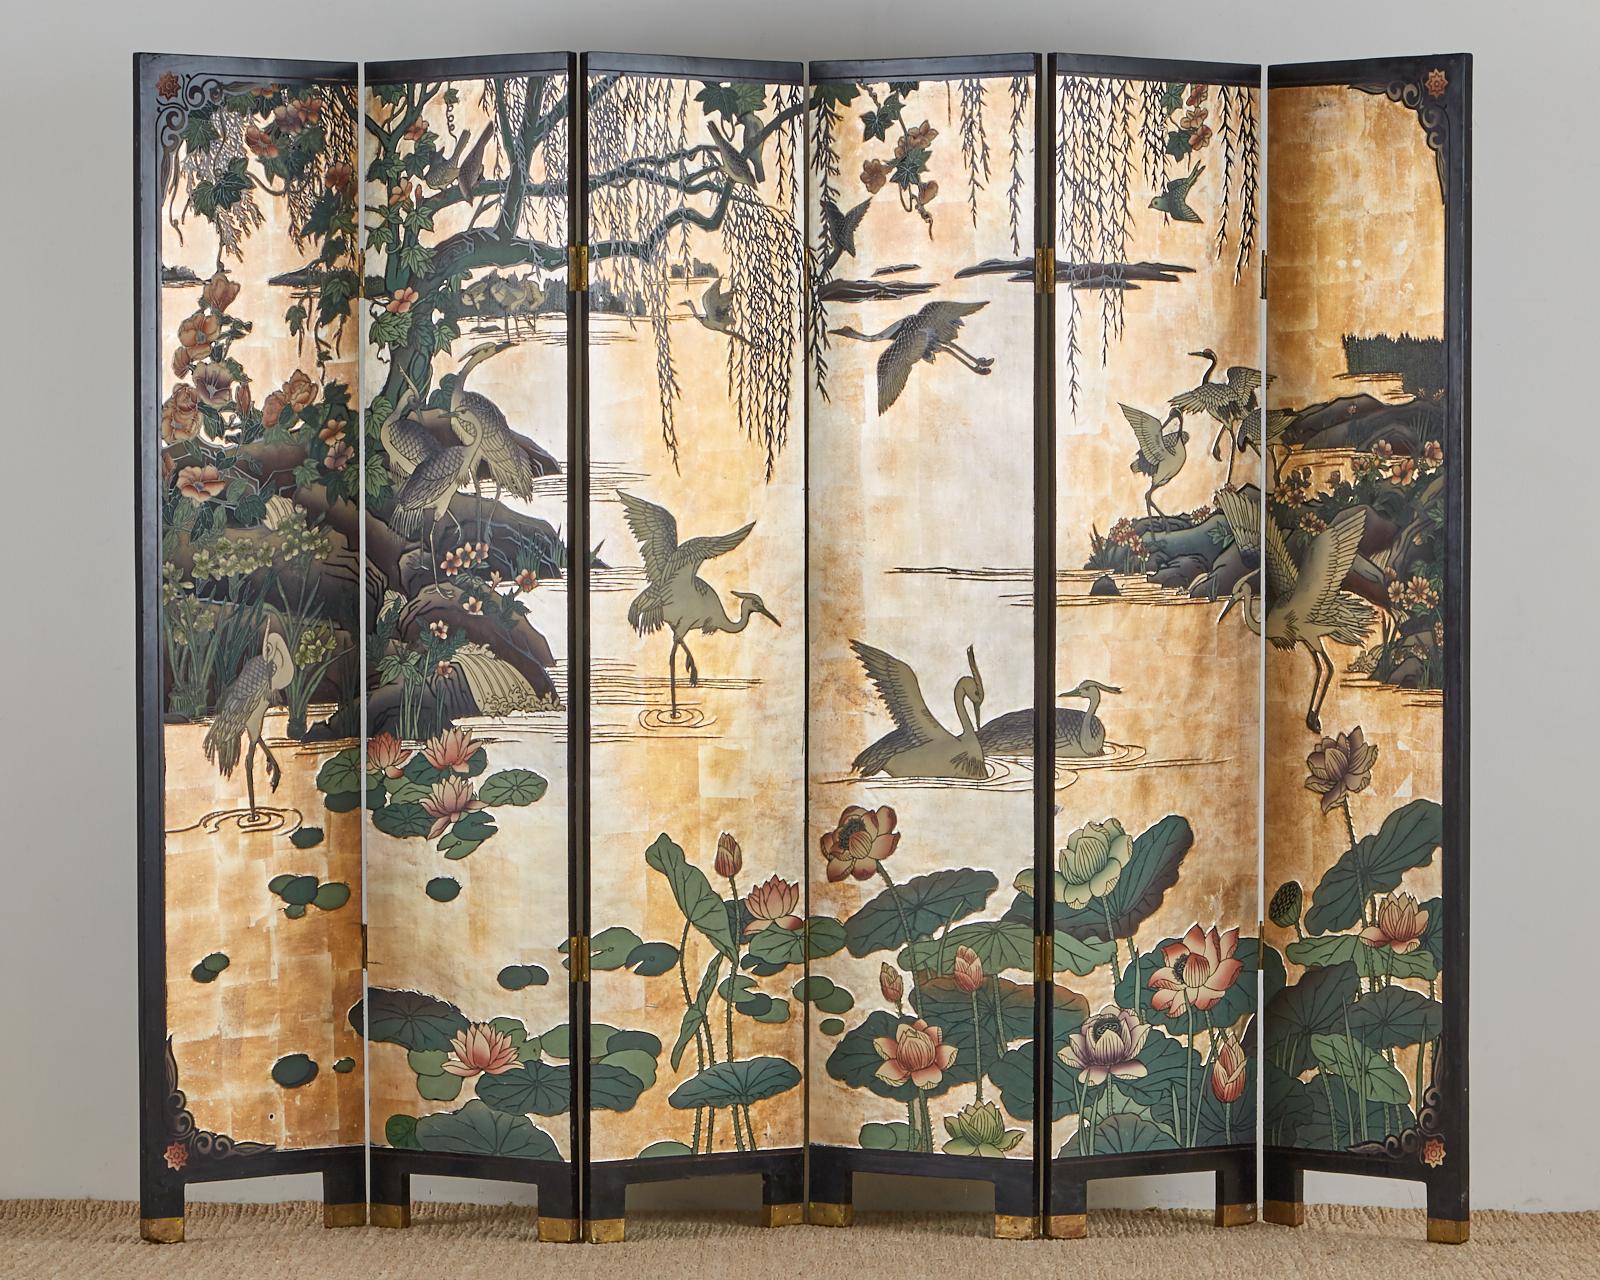 Stunning Chinese export six-panel Coromandel screen featuring a water landscape with cranes on a dramatic gilt background. The beautiful carved scene runs the entire length of each panel and is decorated with lotus, lily pads, willow, and flowers.